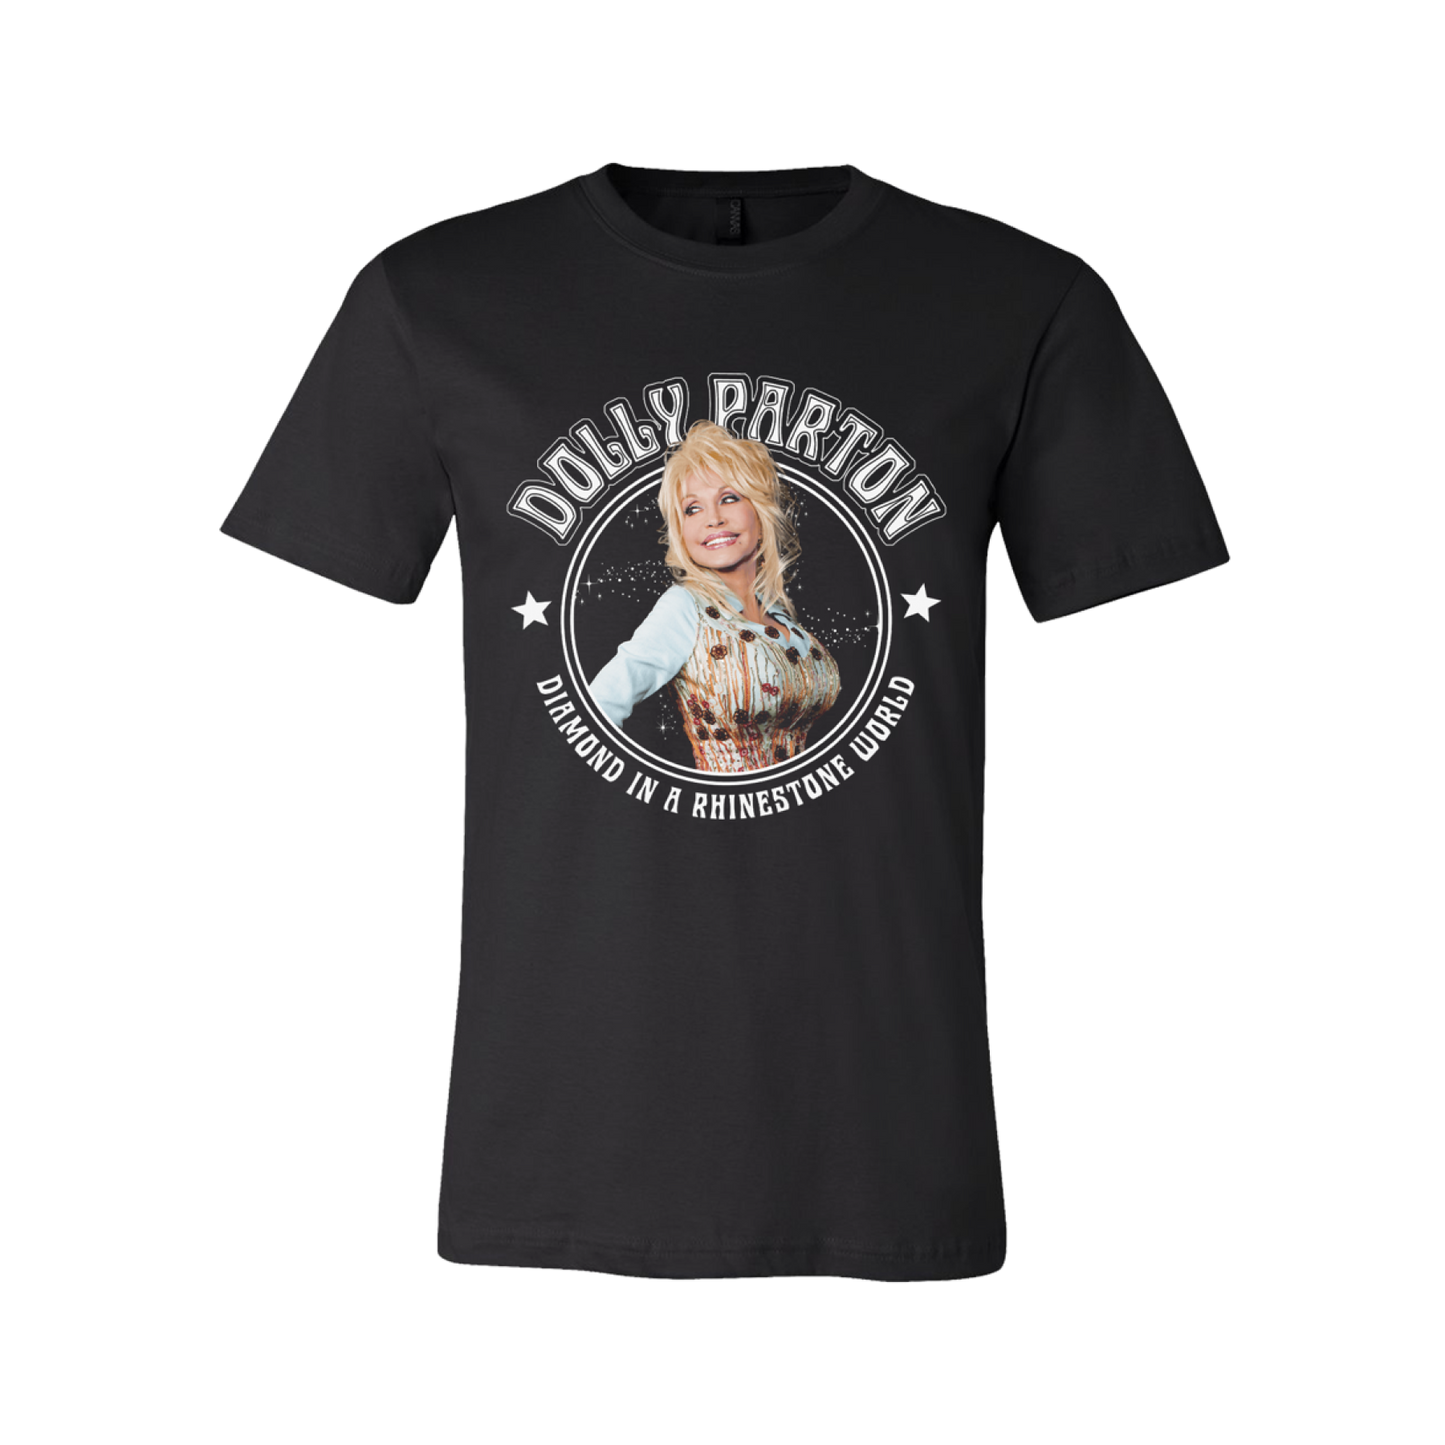 Official Dolly Parton Merchandise. 100% black cotton unisex t-shirt with a photo of Dolly Parton and the lyrics Diamond in a Rhinestone World.